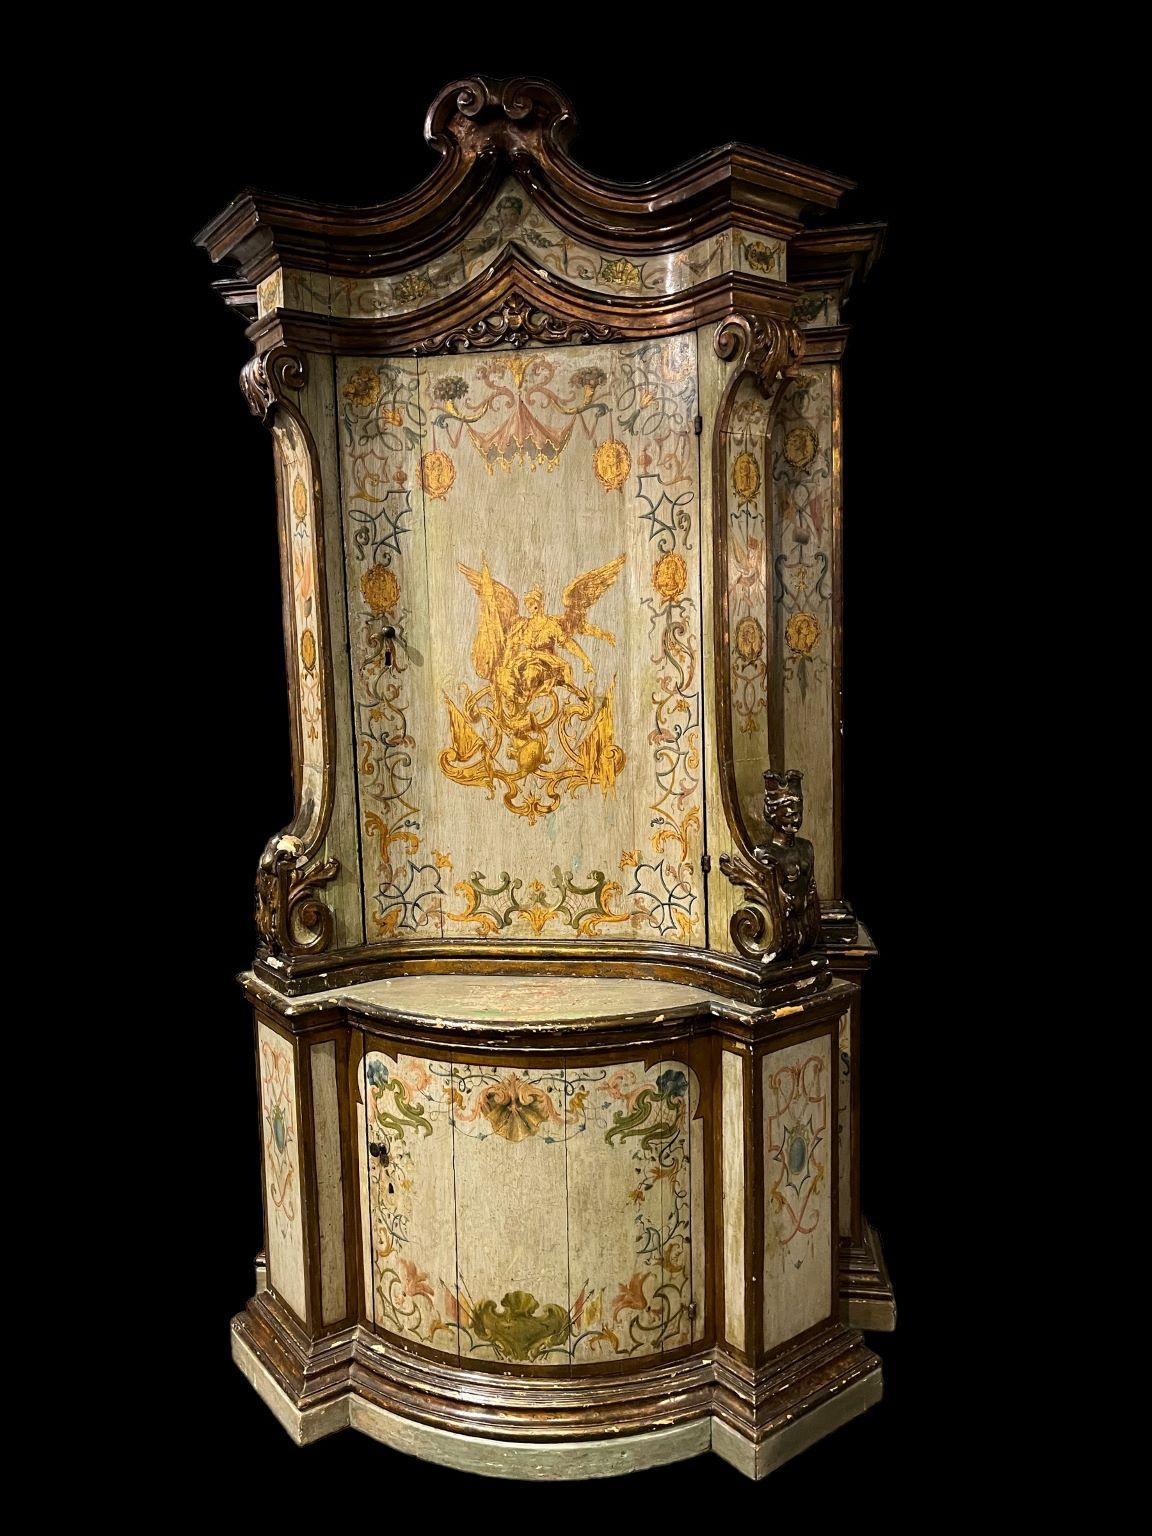 Extraordinary Venetian 18TH Century Italian Painted and Giltwood Cabinet.  An incredible nine-foot cabinet from the late Barbara Walters’ Estate. An unbelievable statement piece for any room.  Condition of cabinet shows paint chips, cracks and minor